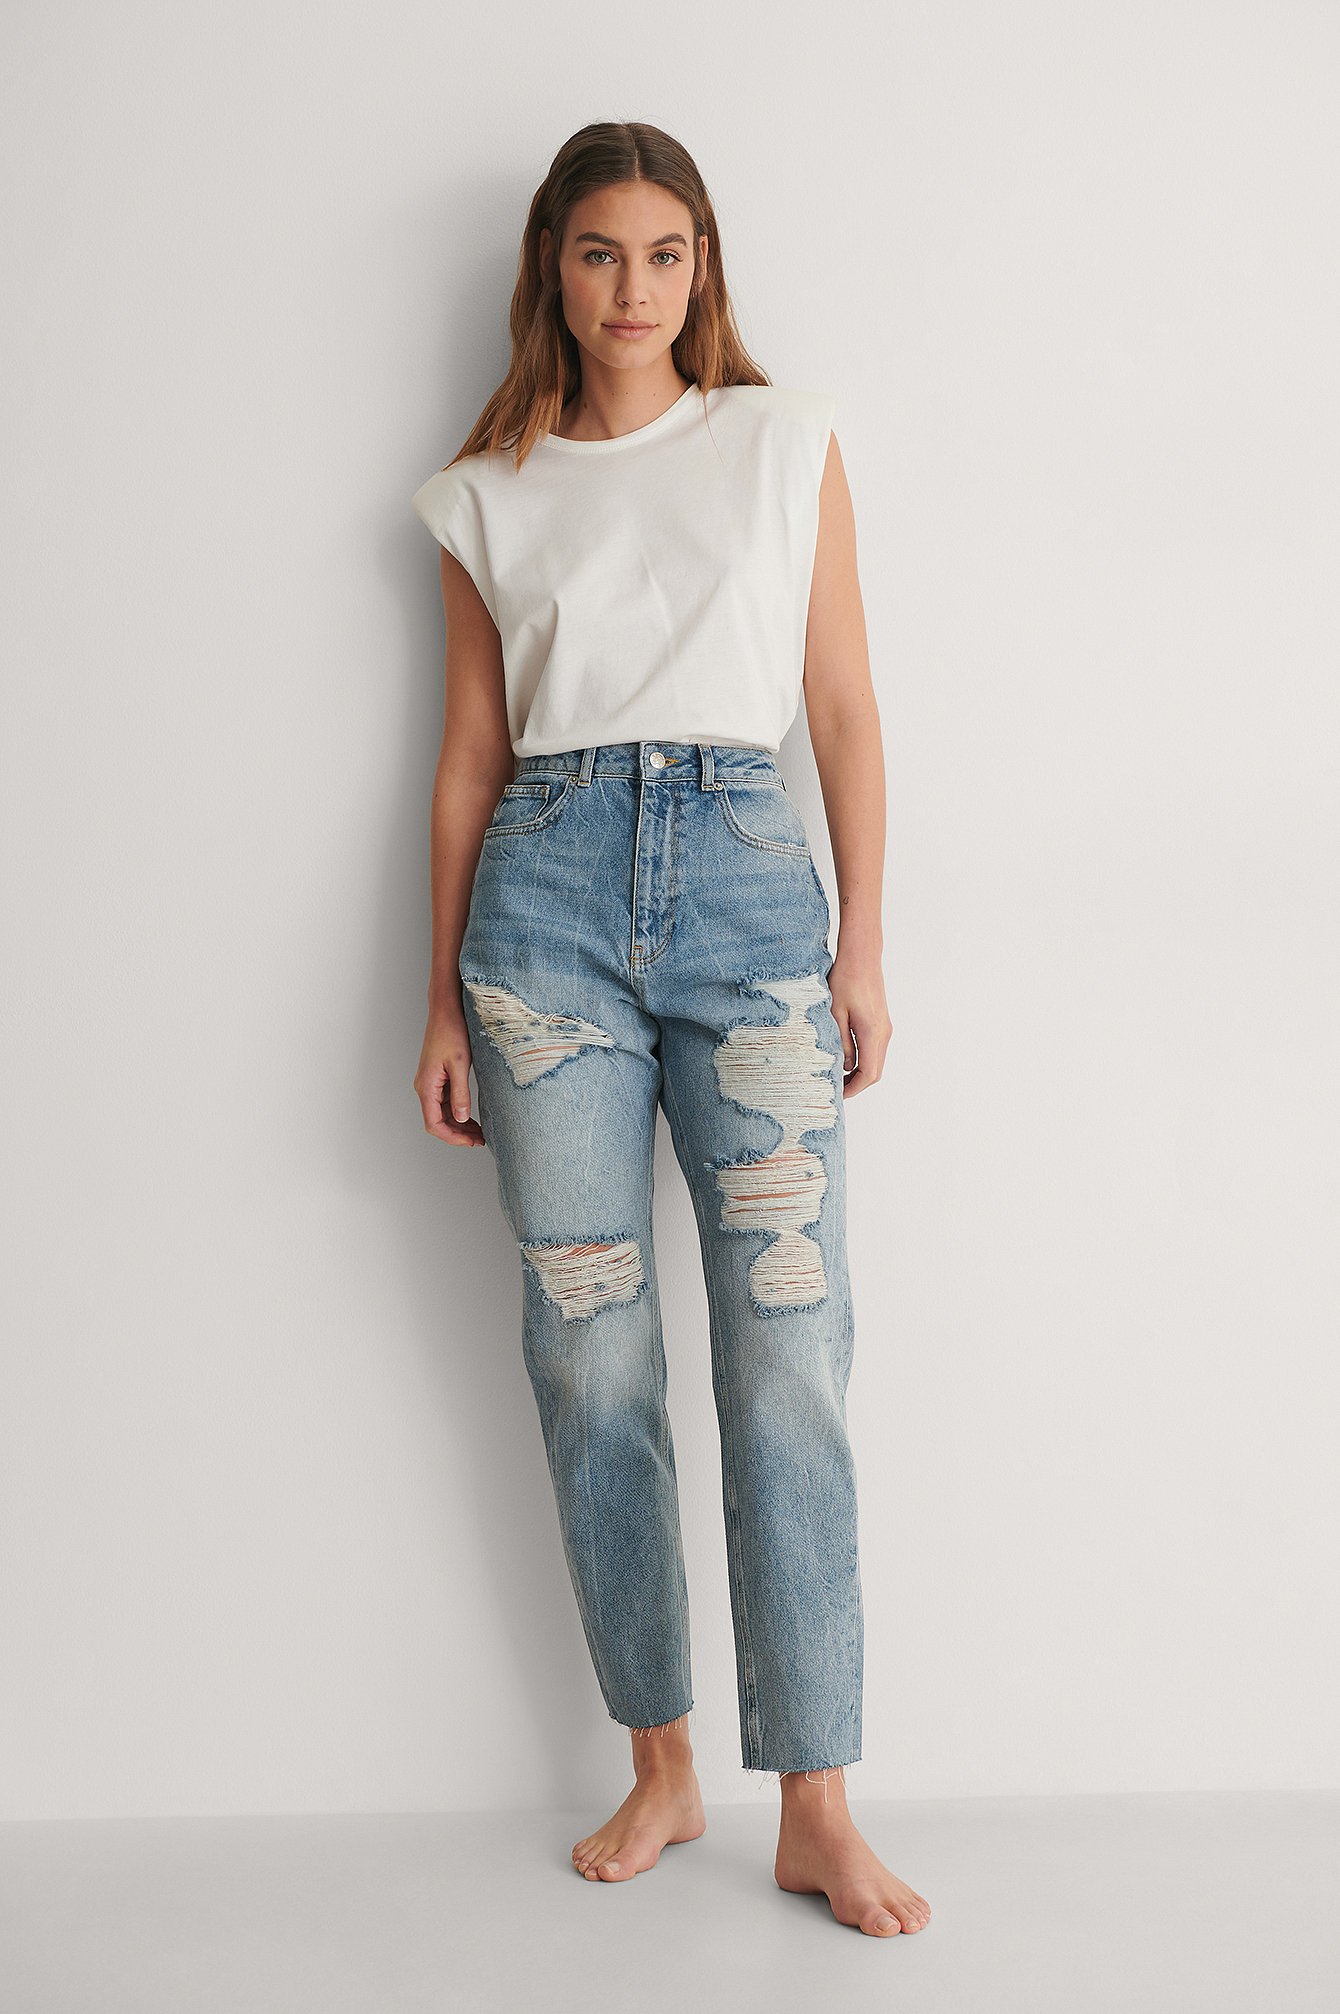 High Waist Ripped Mom Jeans Outfit